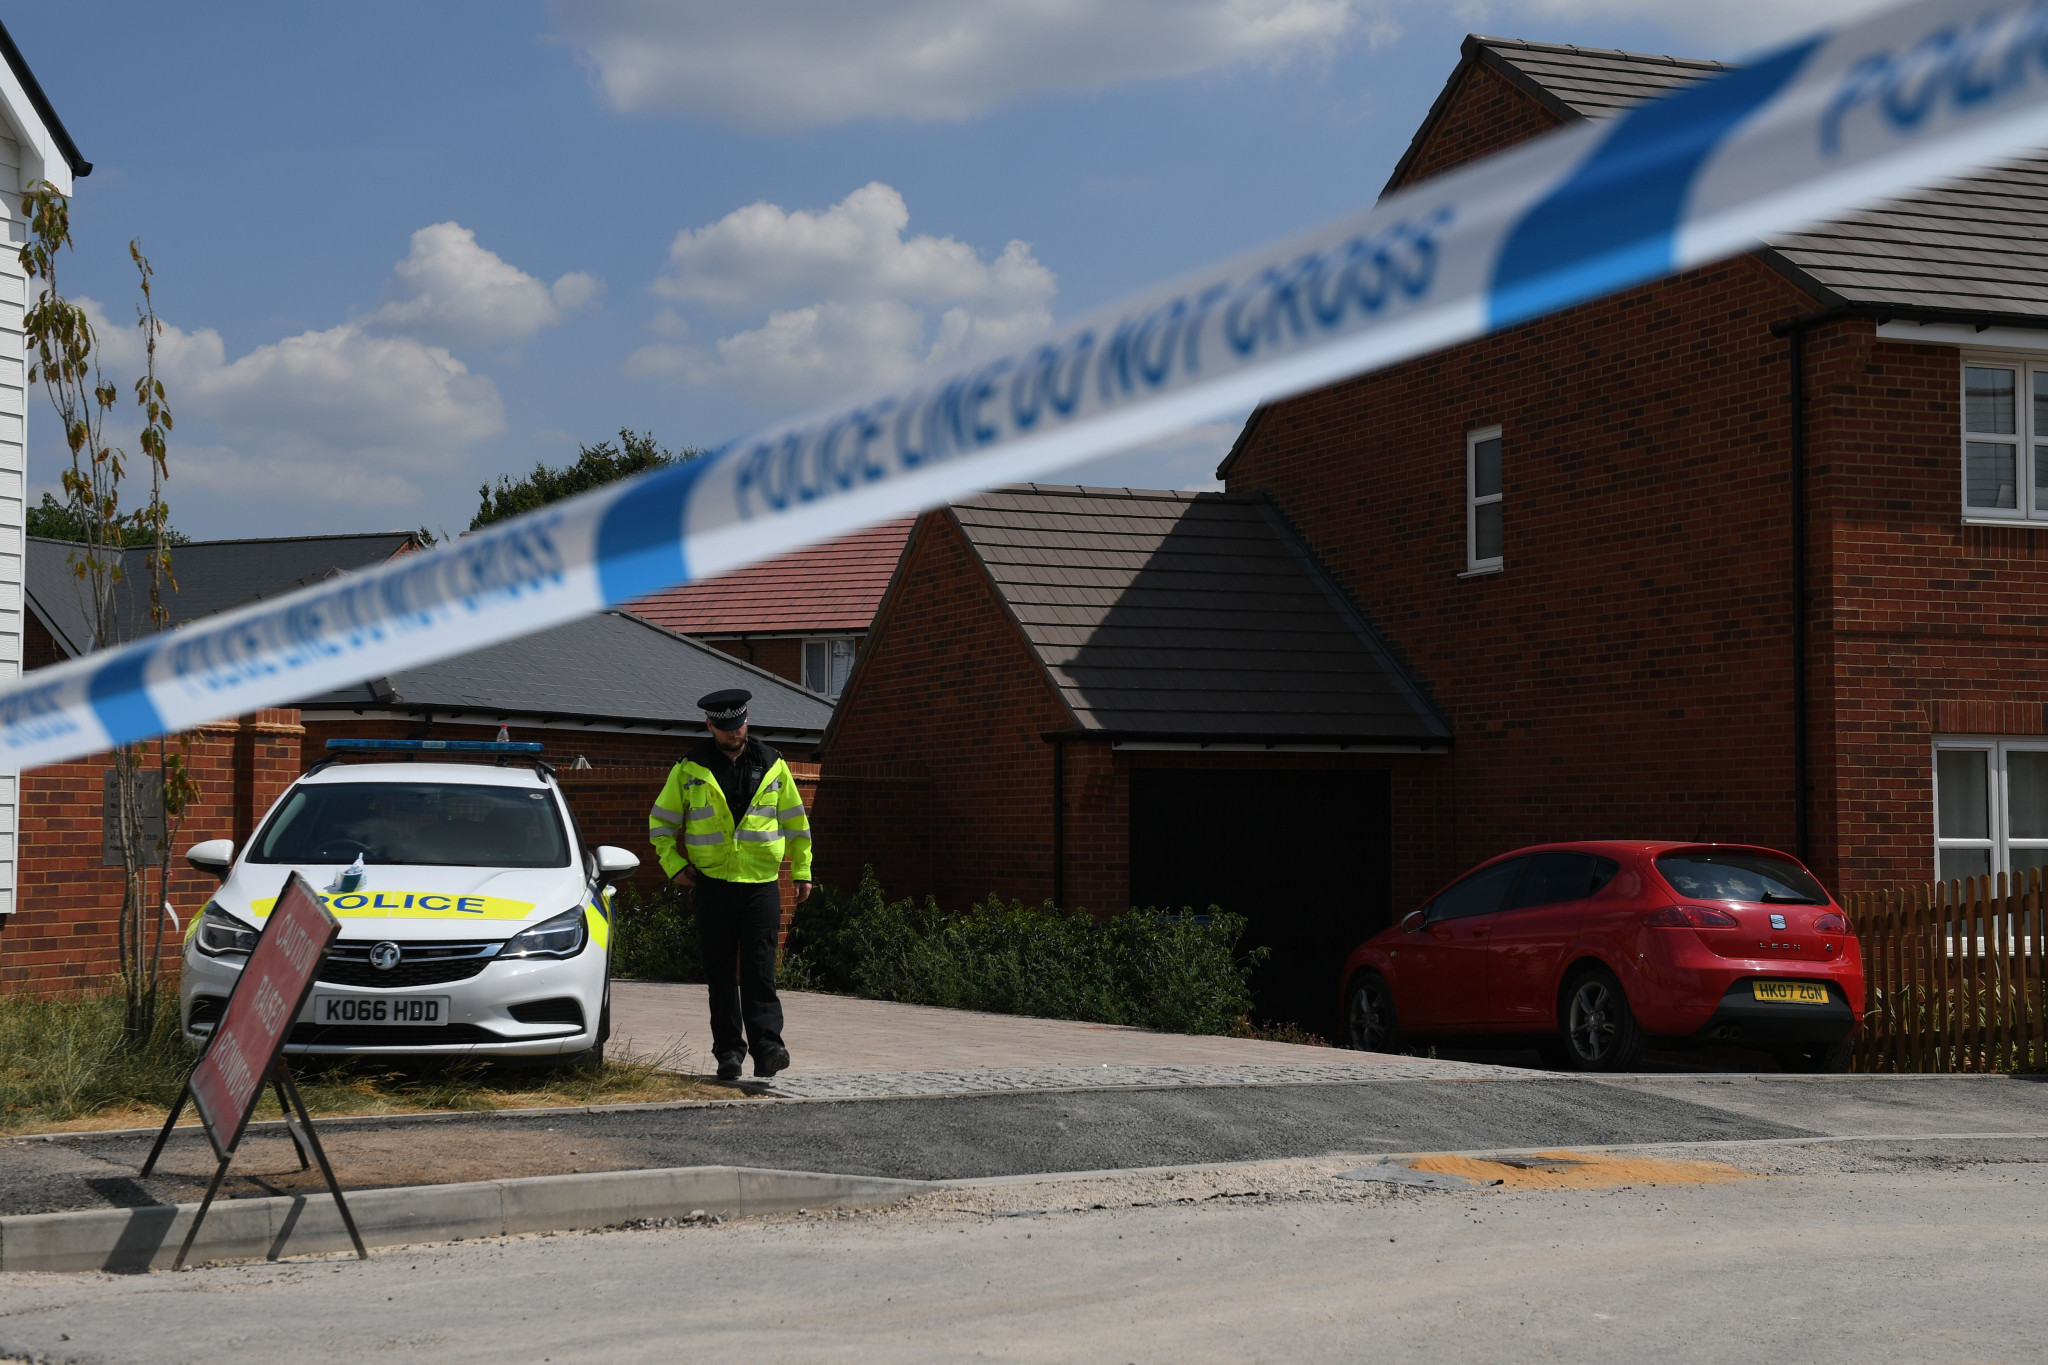 Russia has denied claims it was behind the poisoning in Amesbury ©Getty Images